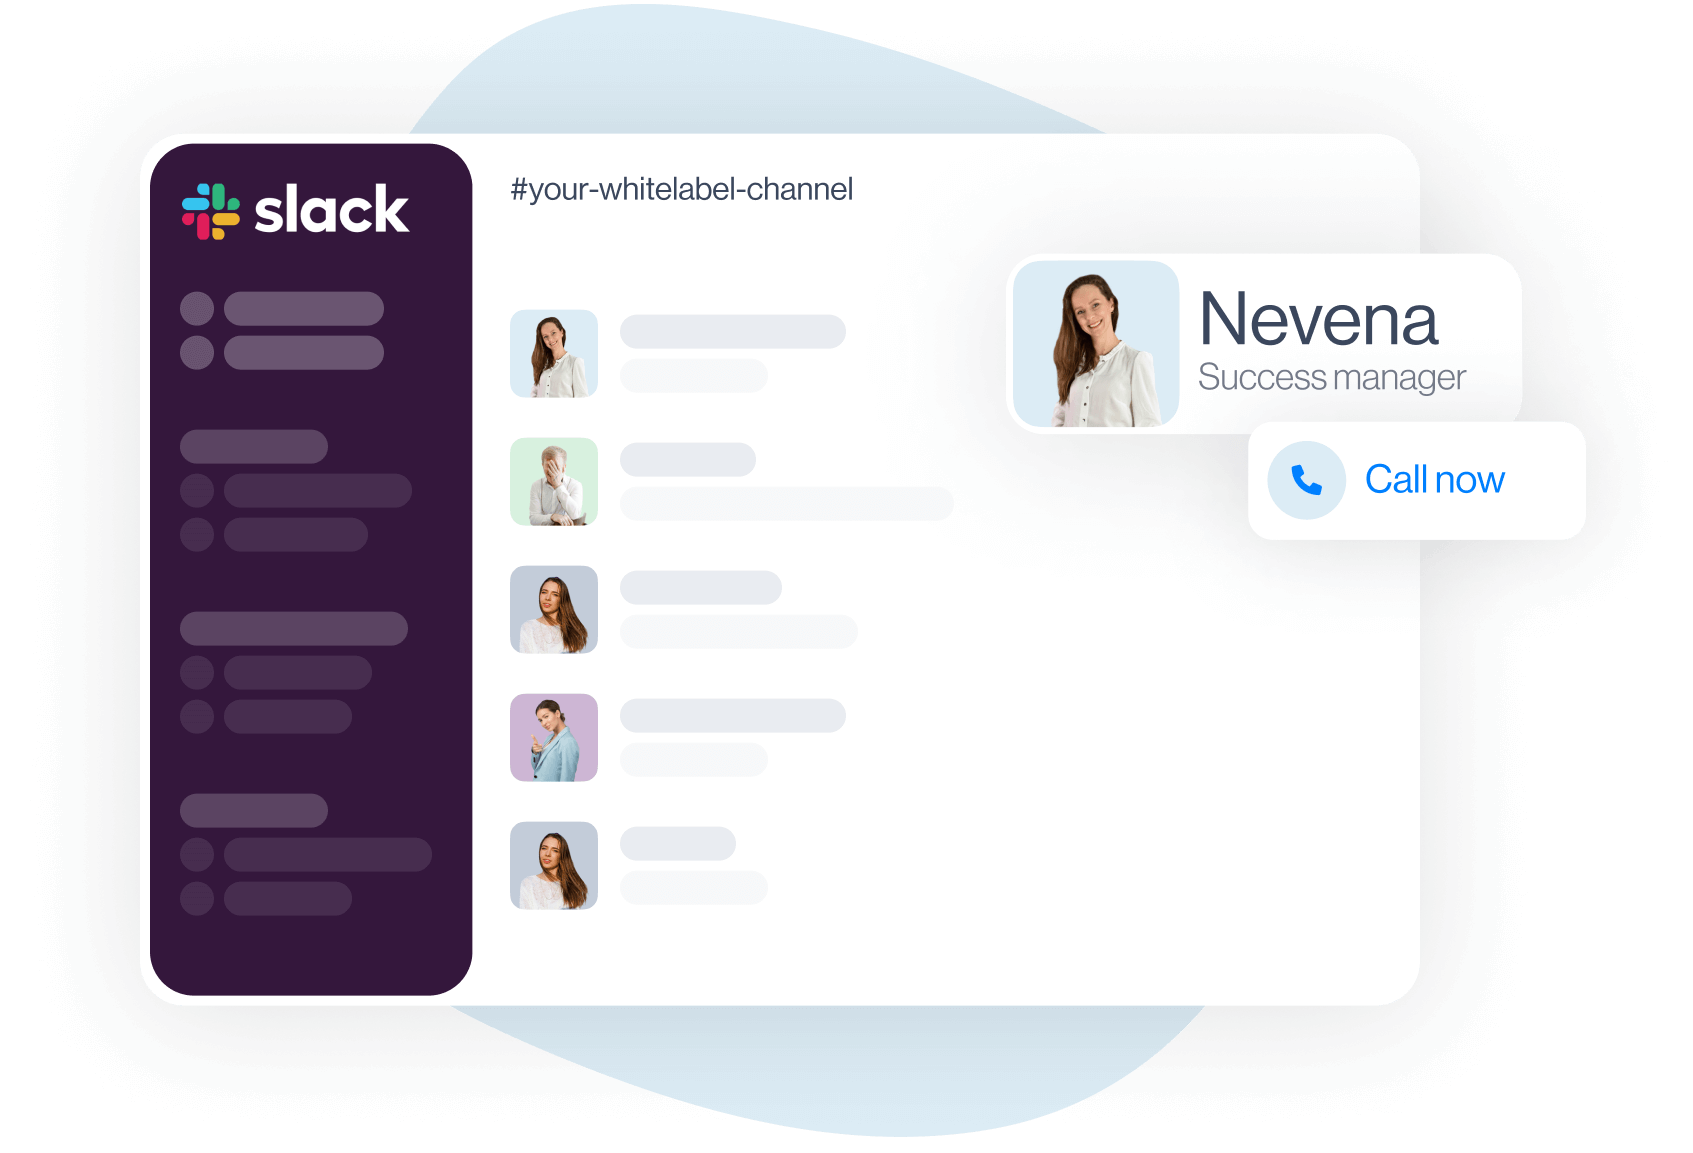 Image of Skylead's customer support Slack channel and customer success manager